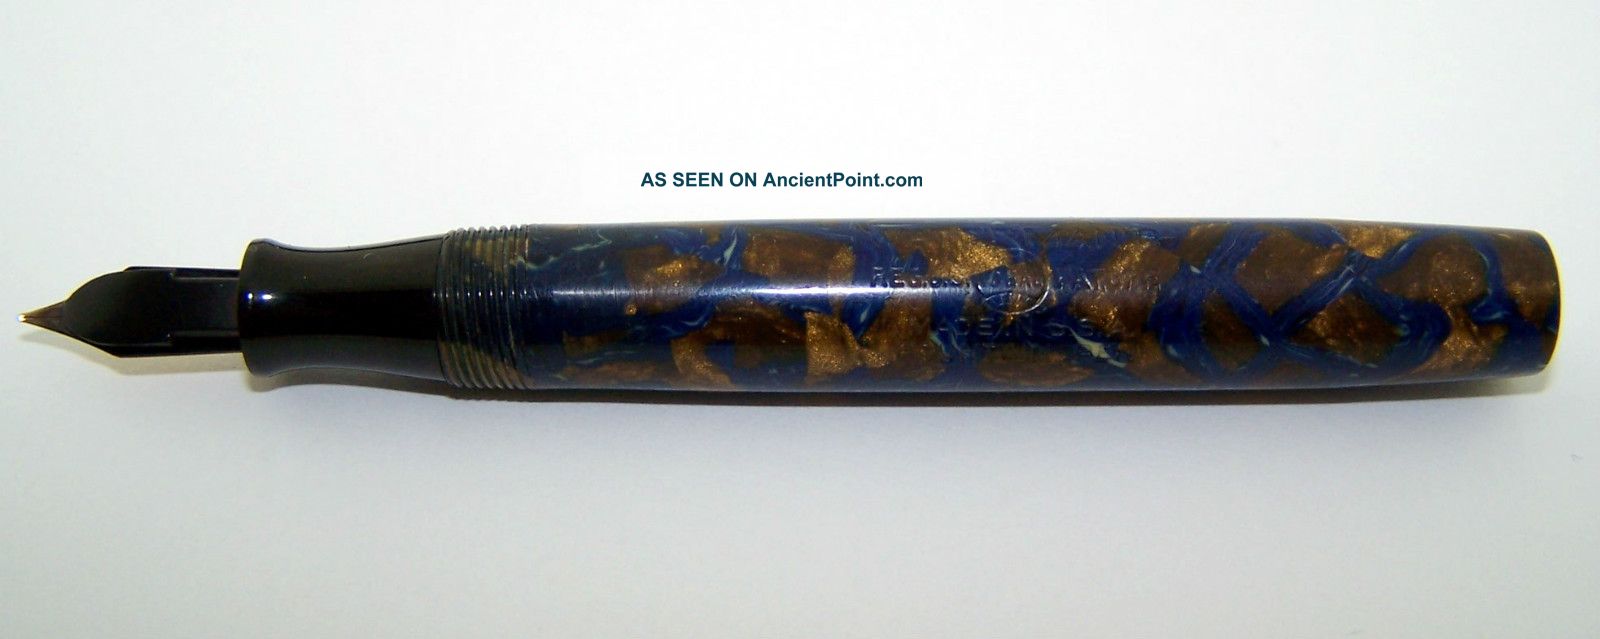  - gorgeous_rare_blue__gold_waterman_ideal_deluxe_lady_patricia_fountain_pen_wow_3_lgw